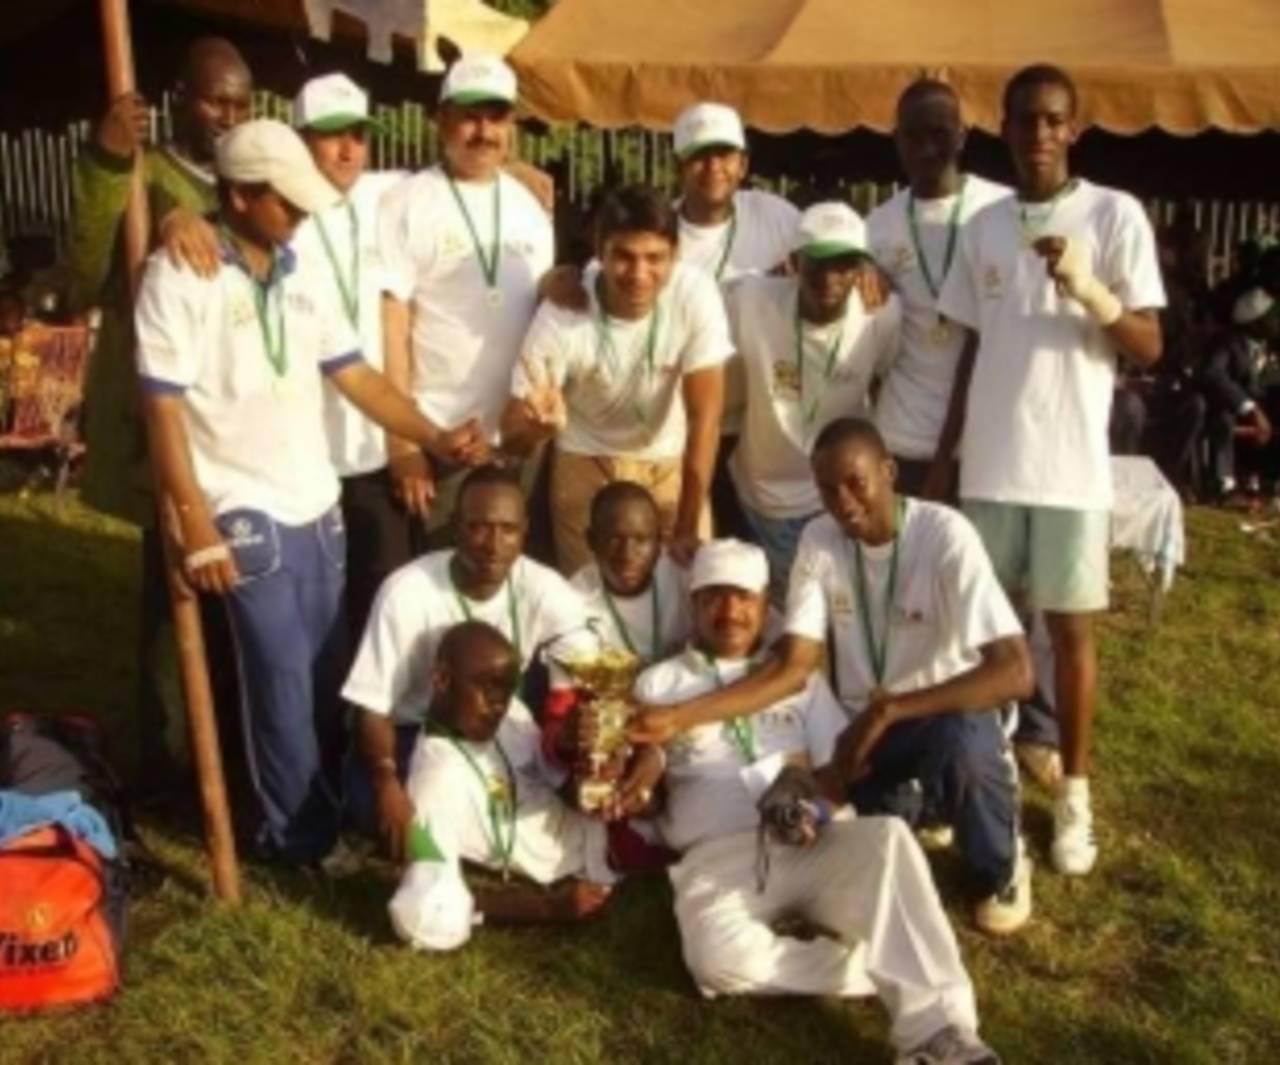 All Stars, winners of Mali's National Cricket Championship, pose with their trophy, August 11 2010